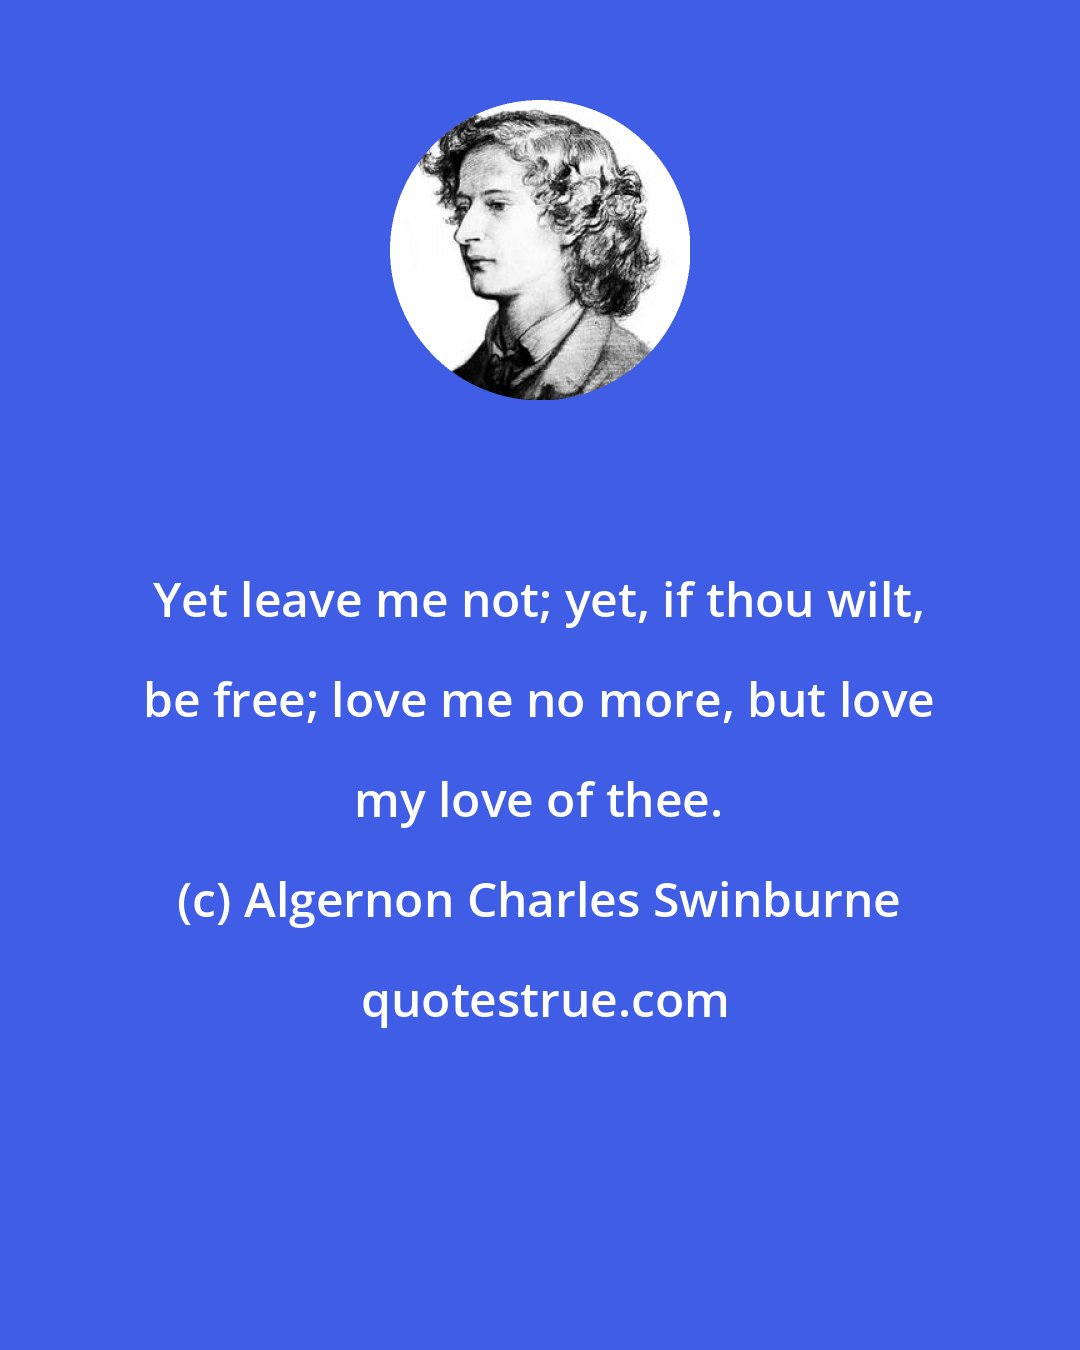 Algernon Charles Swinburne: Yet leave me not; yet, if thou wilt, be free; love me no more, but love my love of thee.